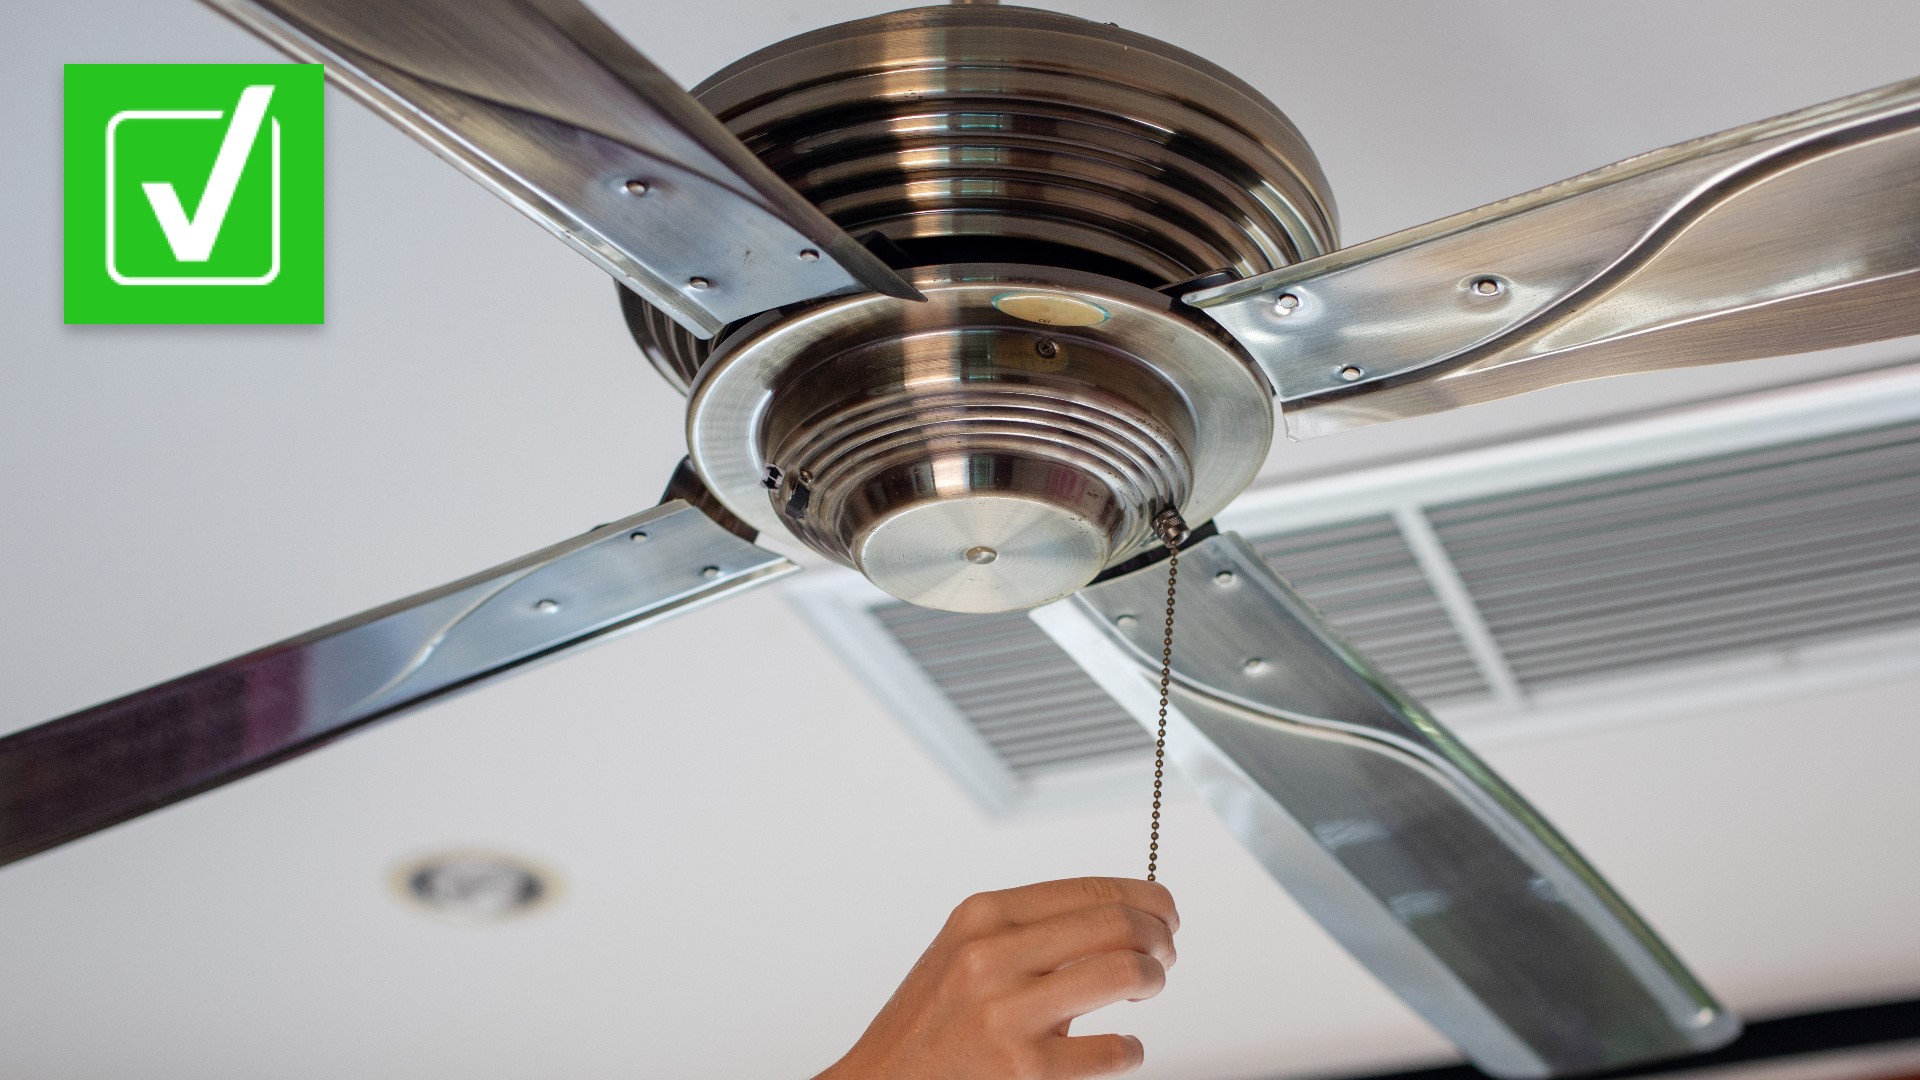 Ceiling Fan Go In The Summer, Which Direction Should Ceiling Fans Turn In The Summertime